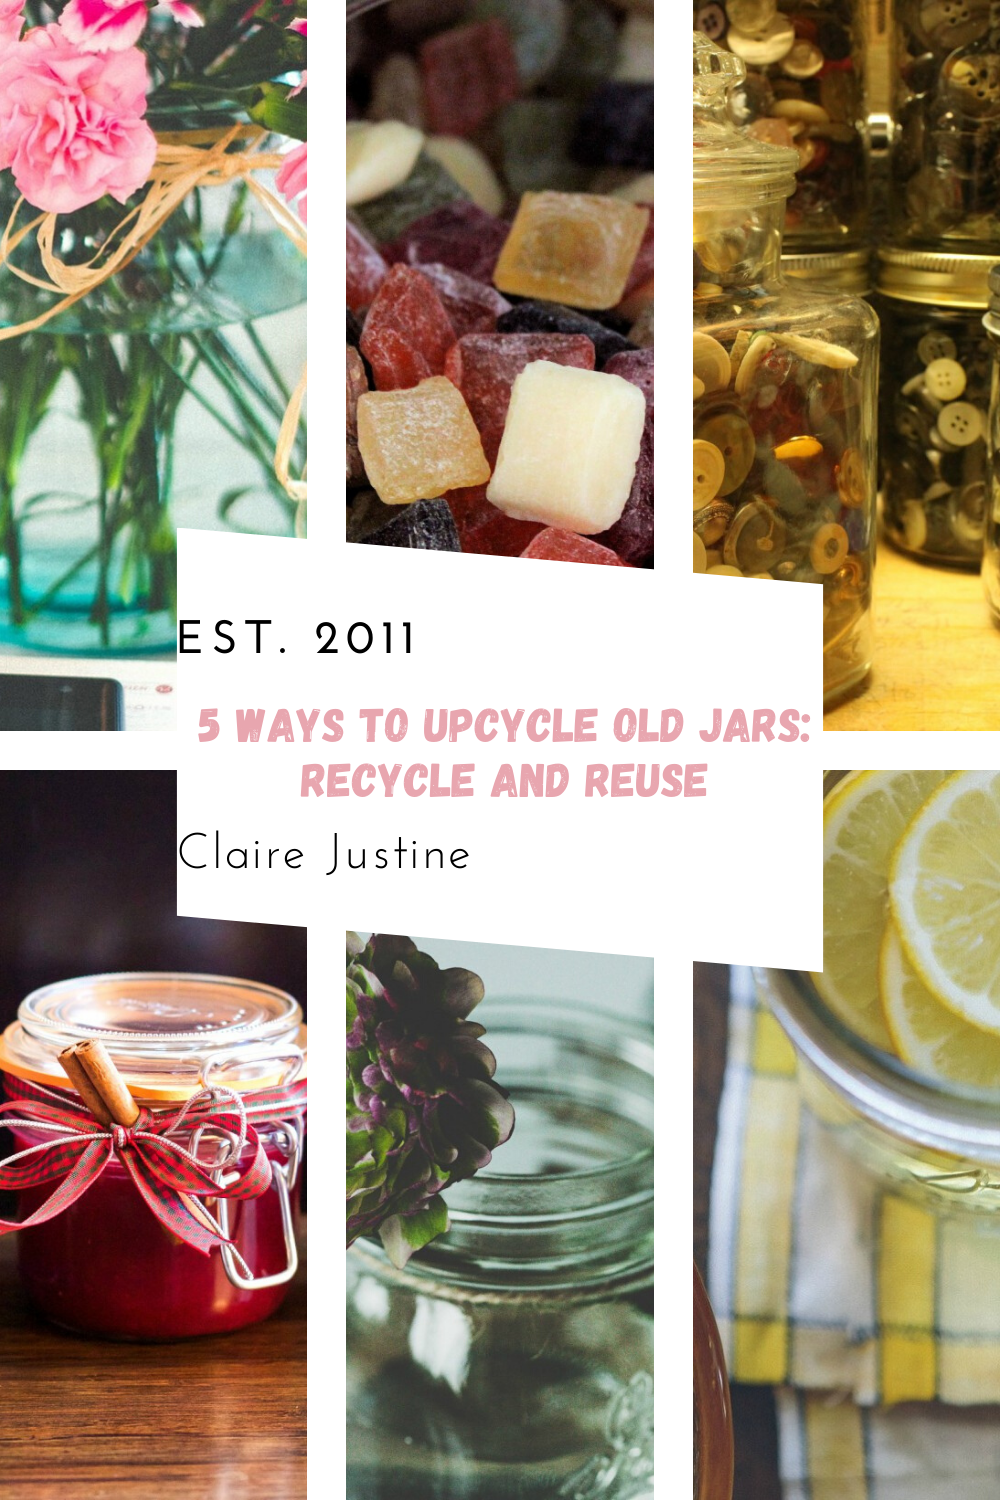 5 Ways To Upcycle Old Jars: Recycle And Reuse